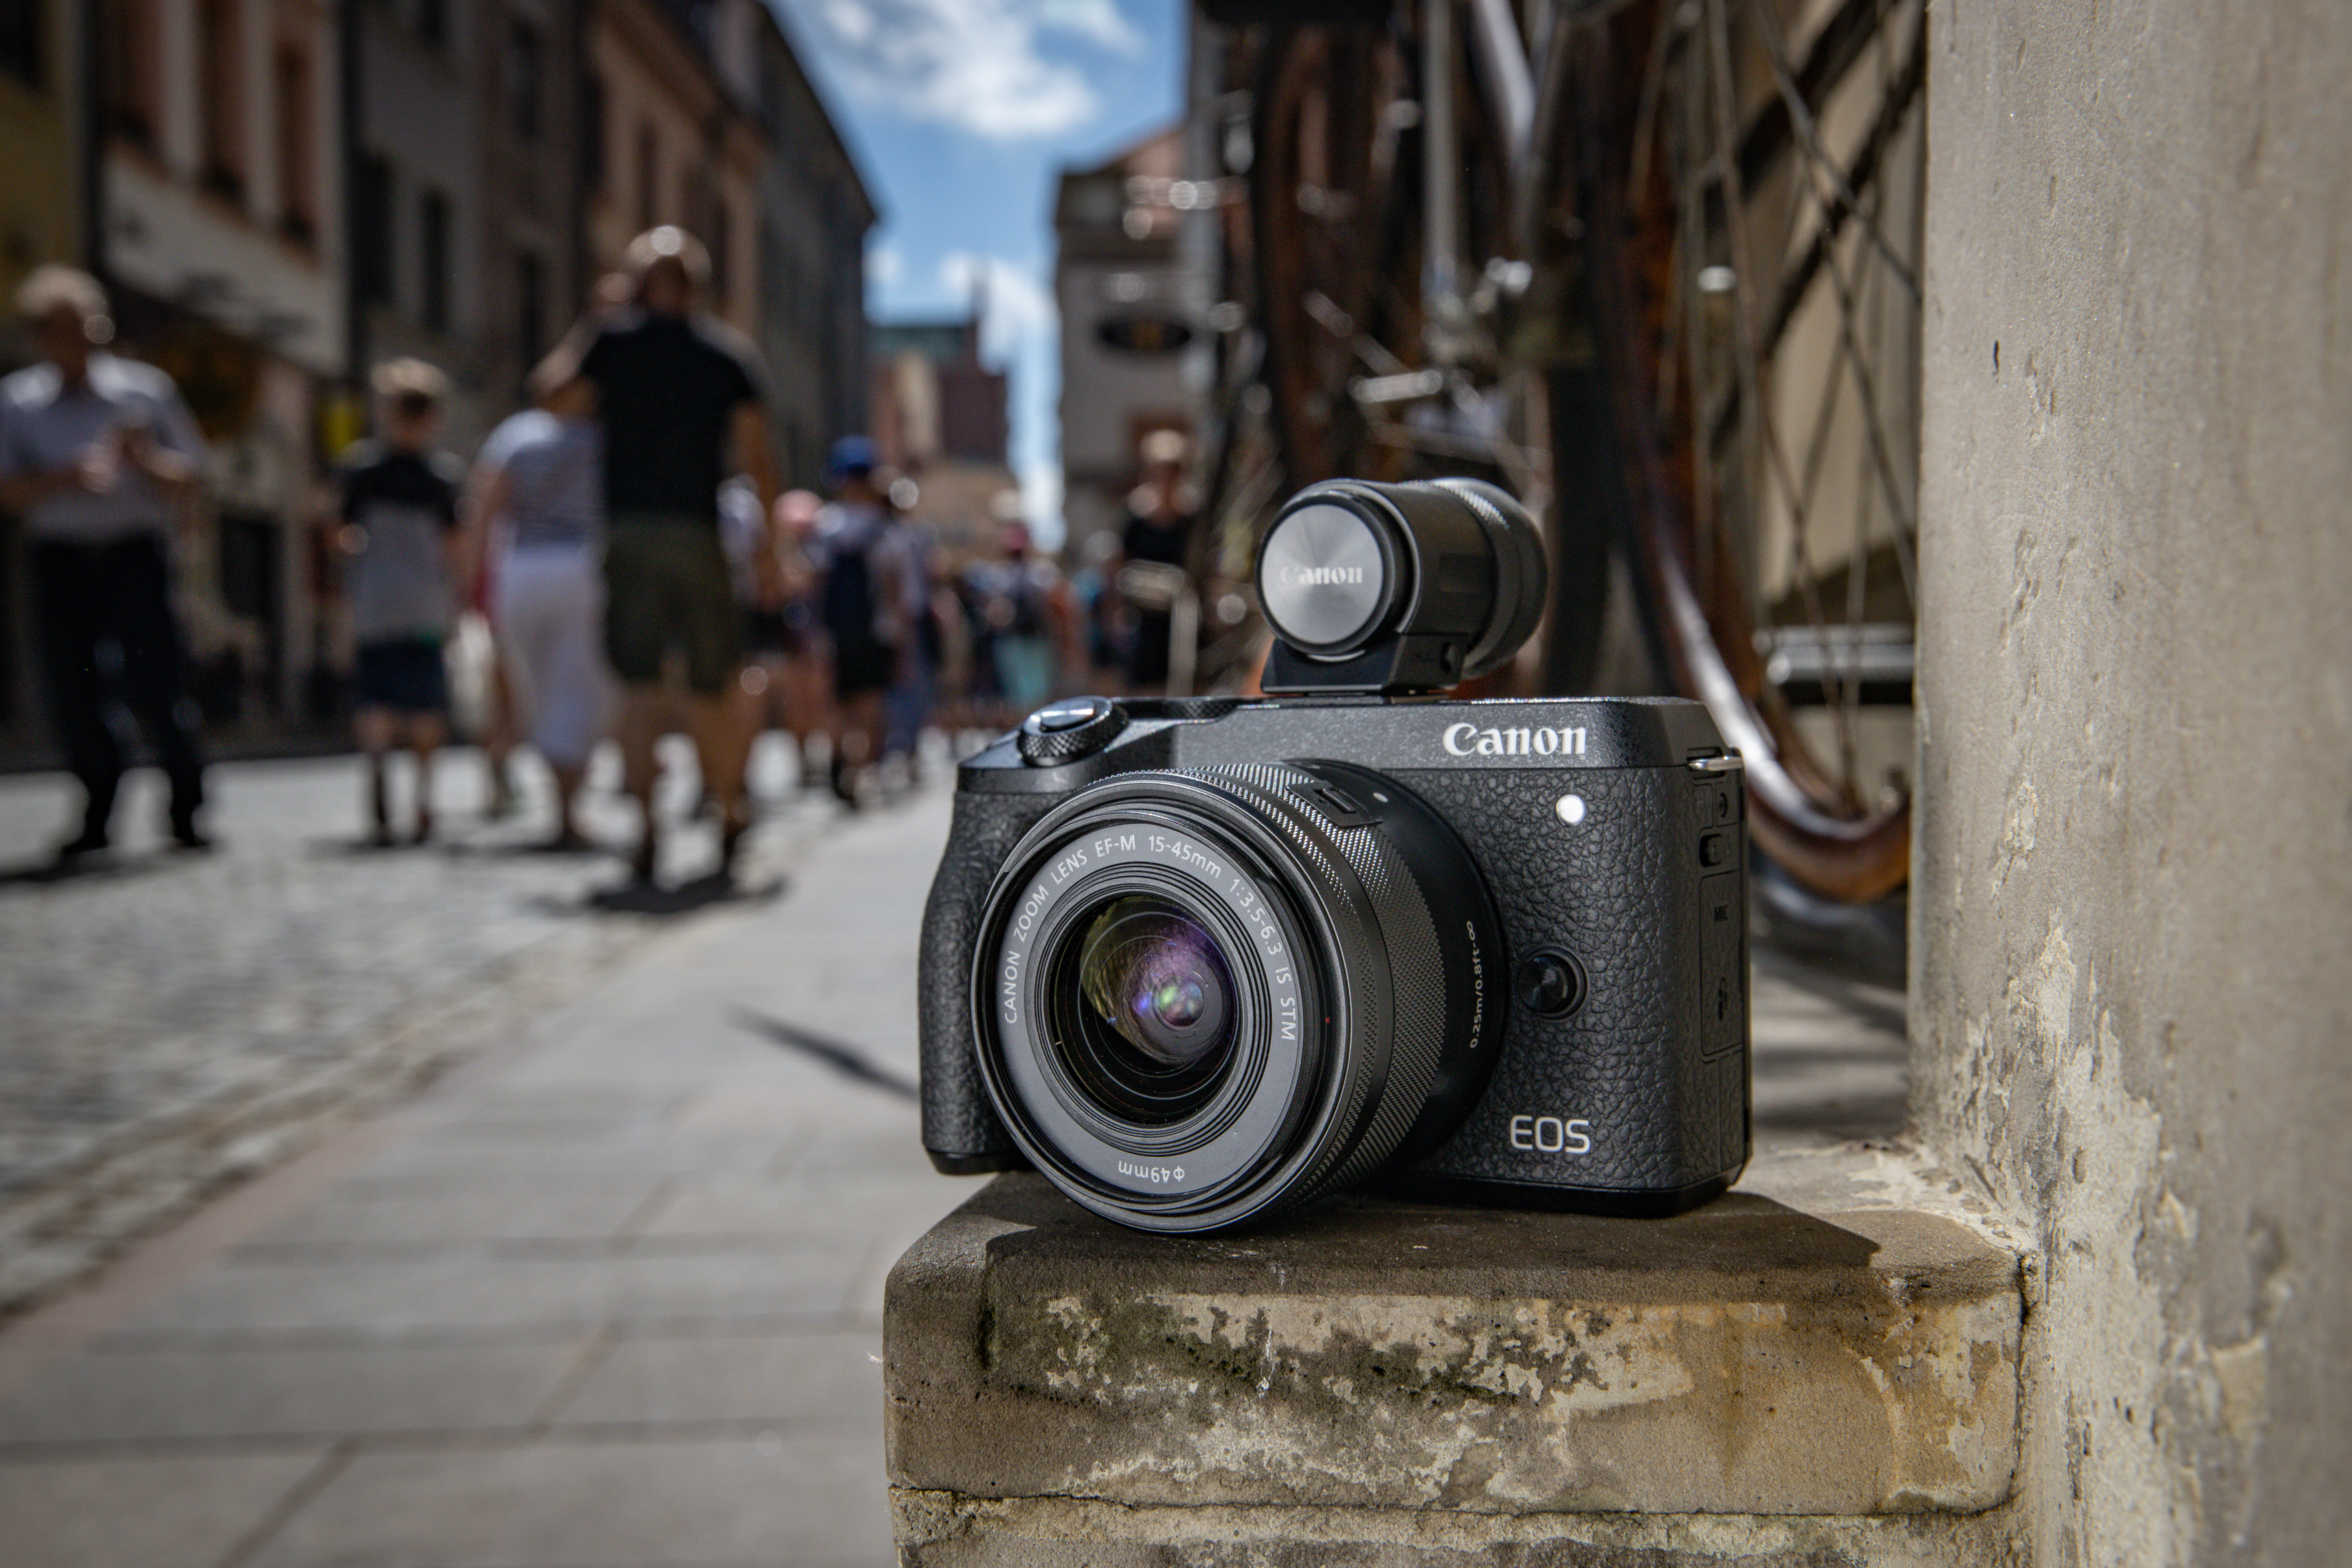 The Canon EOS M6 Mark II, one of the best Canon cameras, with its optional viewfinder sitting on a wall in a street